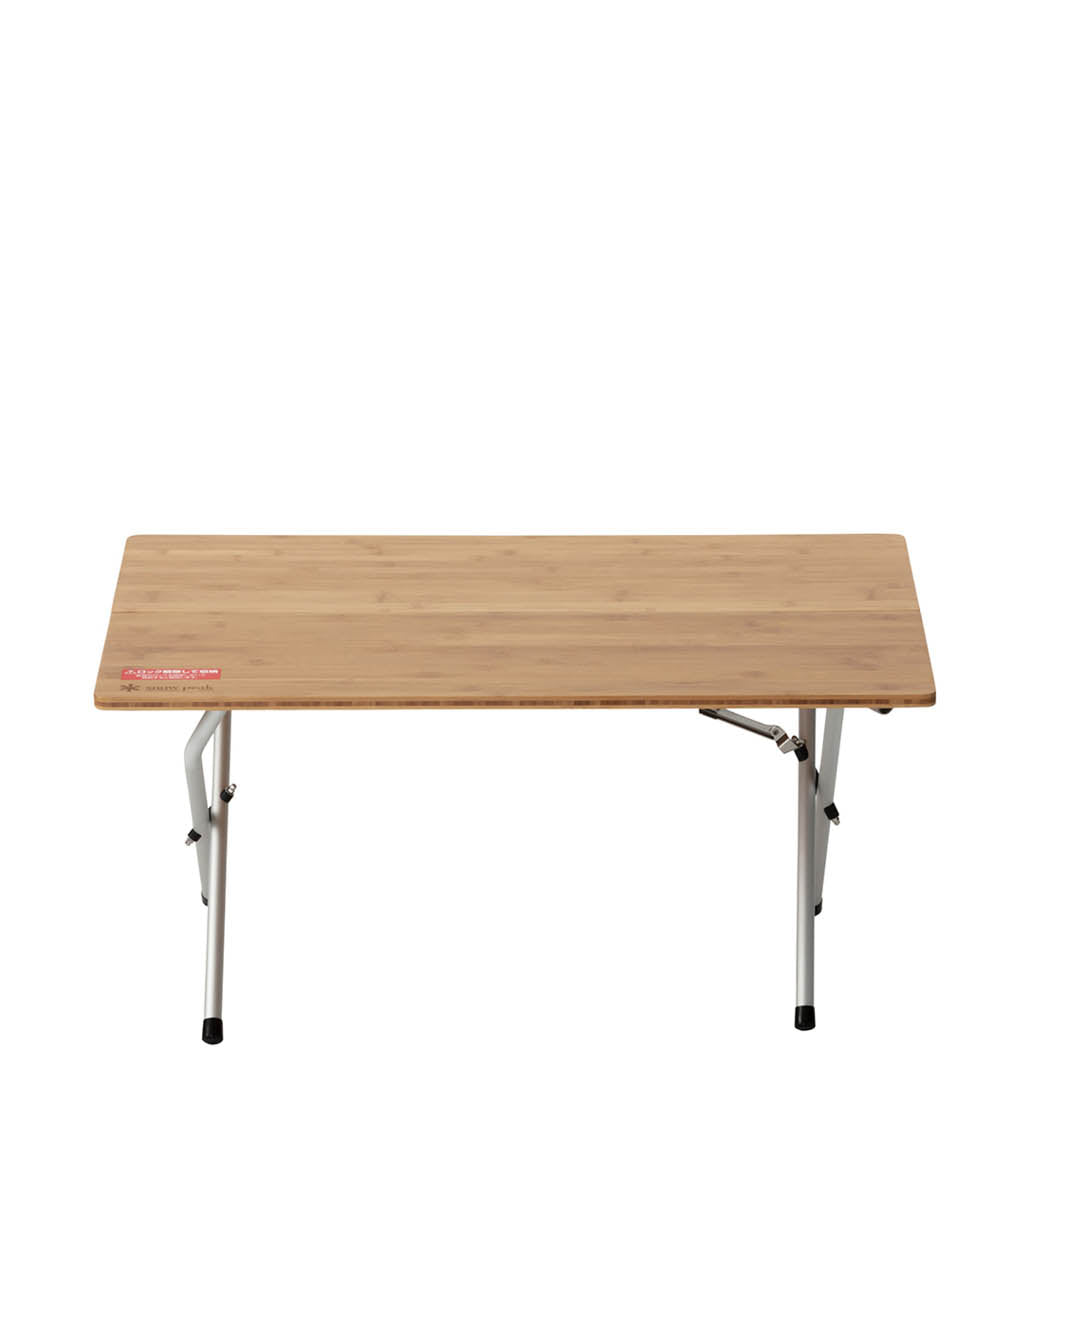 Renewed Single Action Low Table